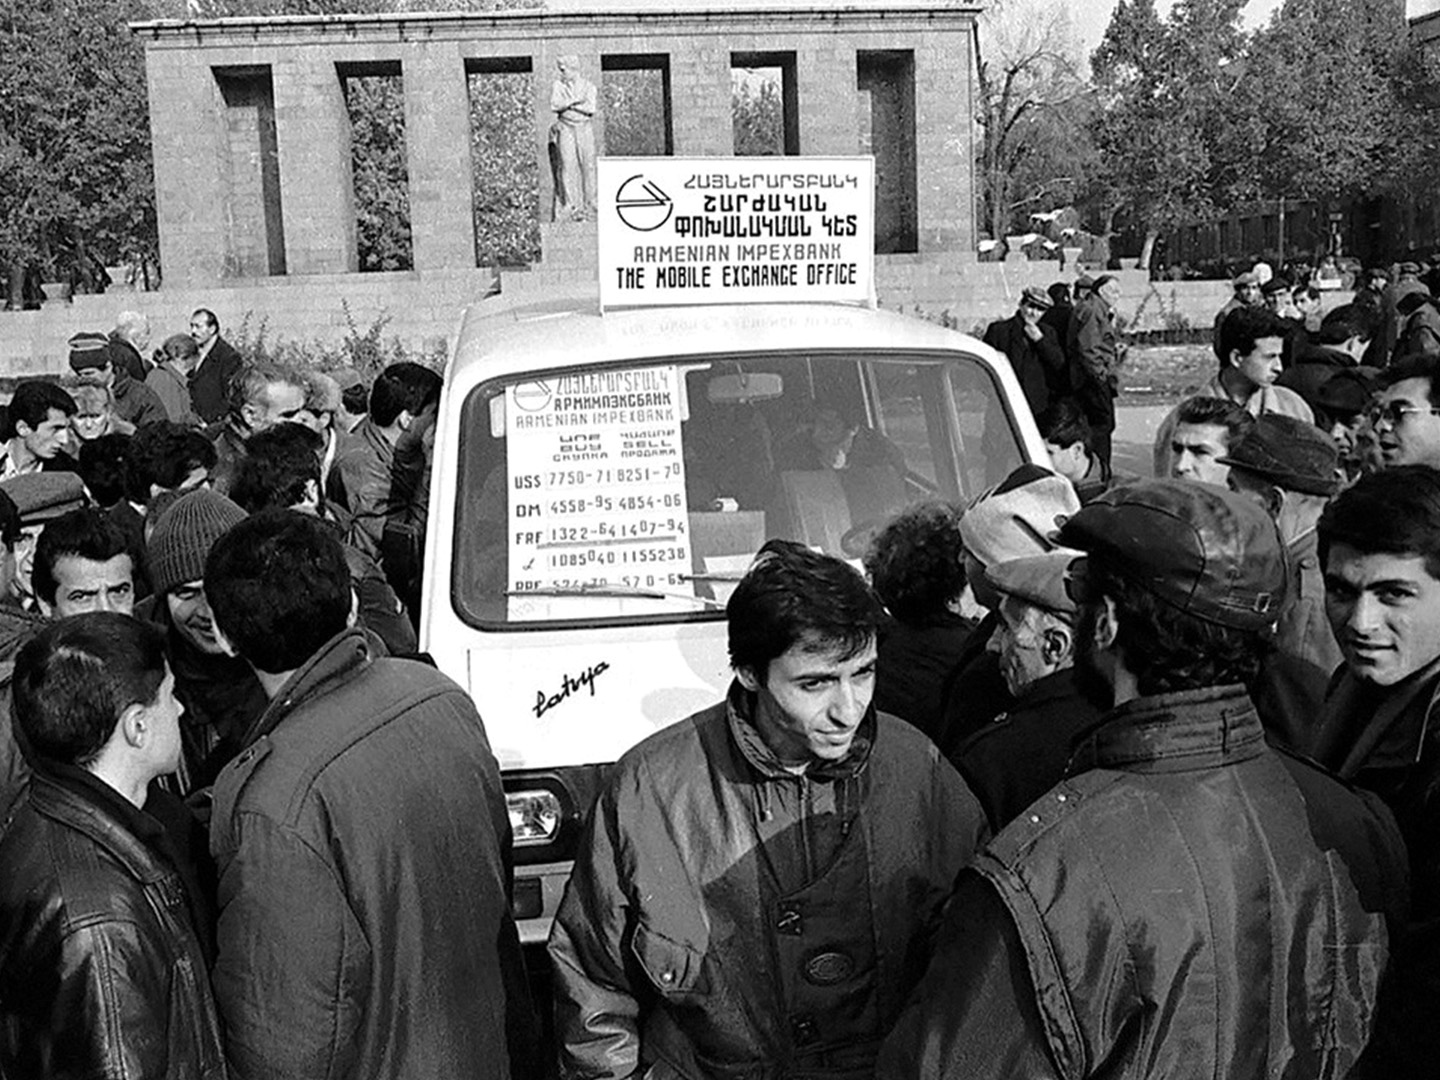 Masses in Yerevan besiege a mobile exchange office across the recently-established Central Bank of Armenia in 1993 to trade their rubles for the country’s new national currency— the dram.